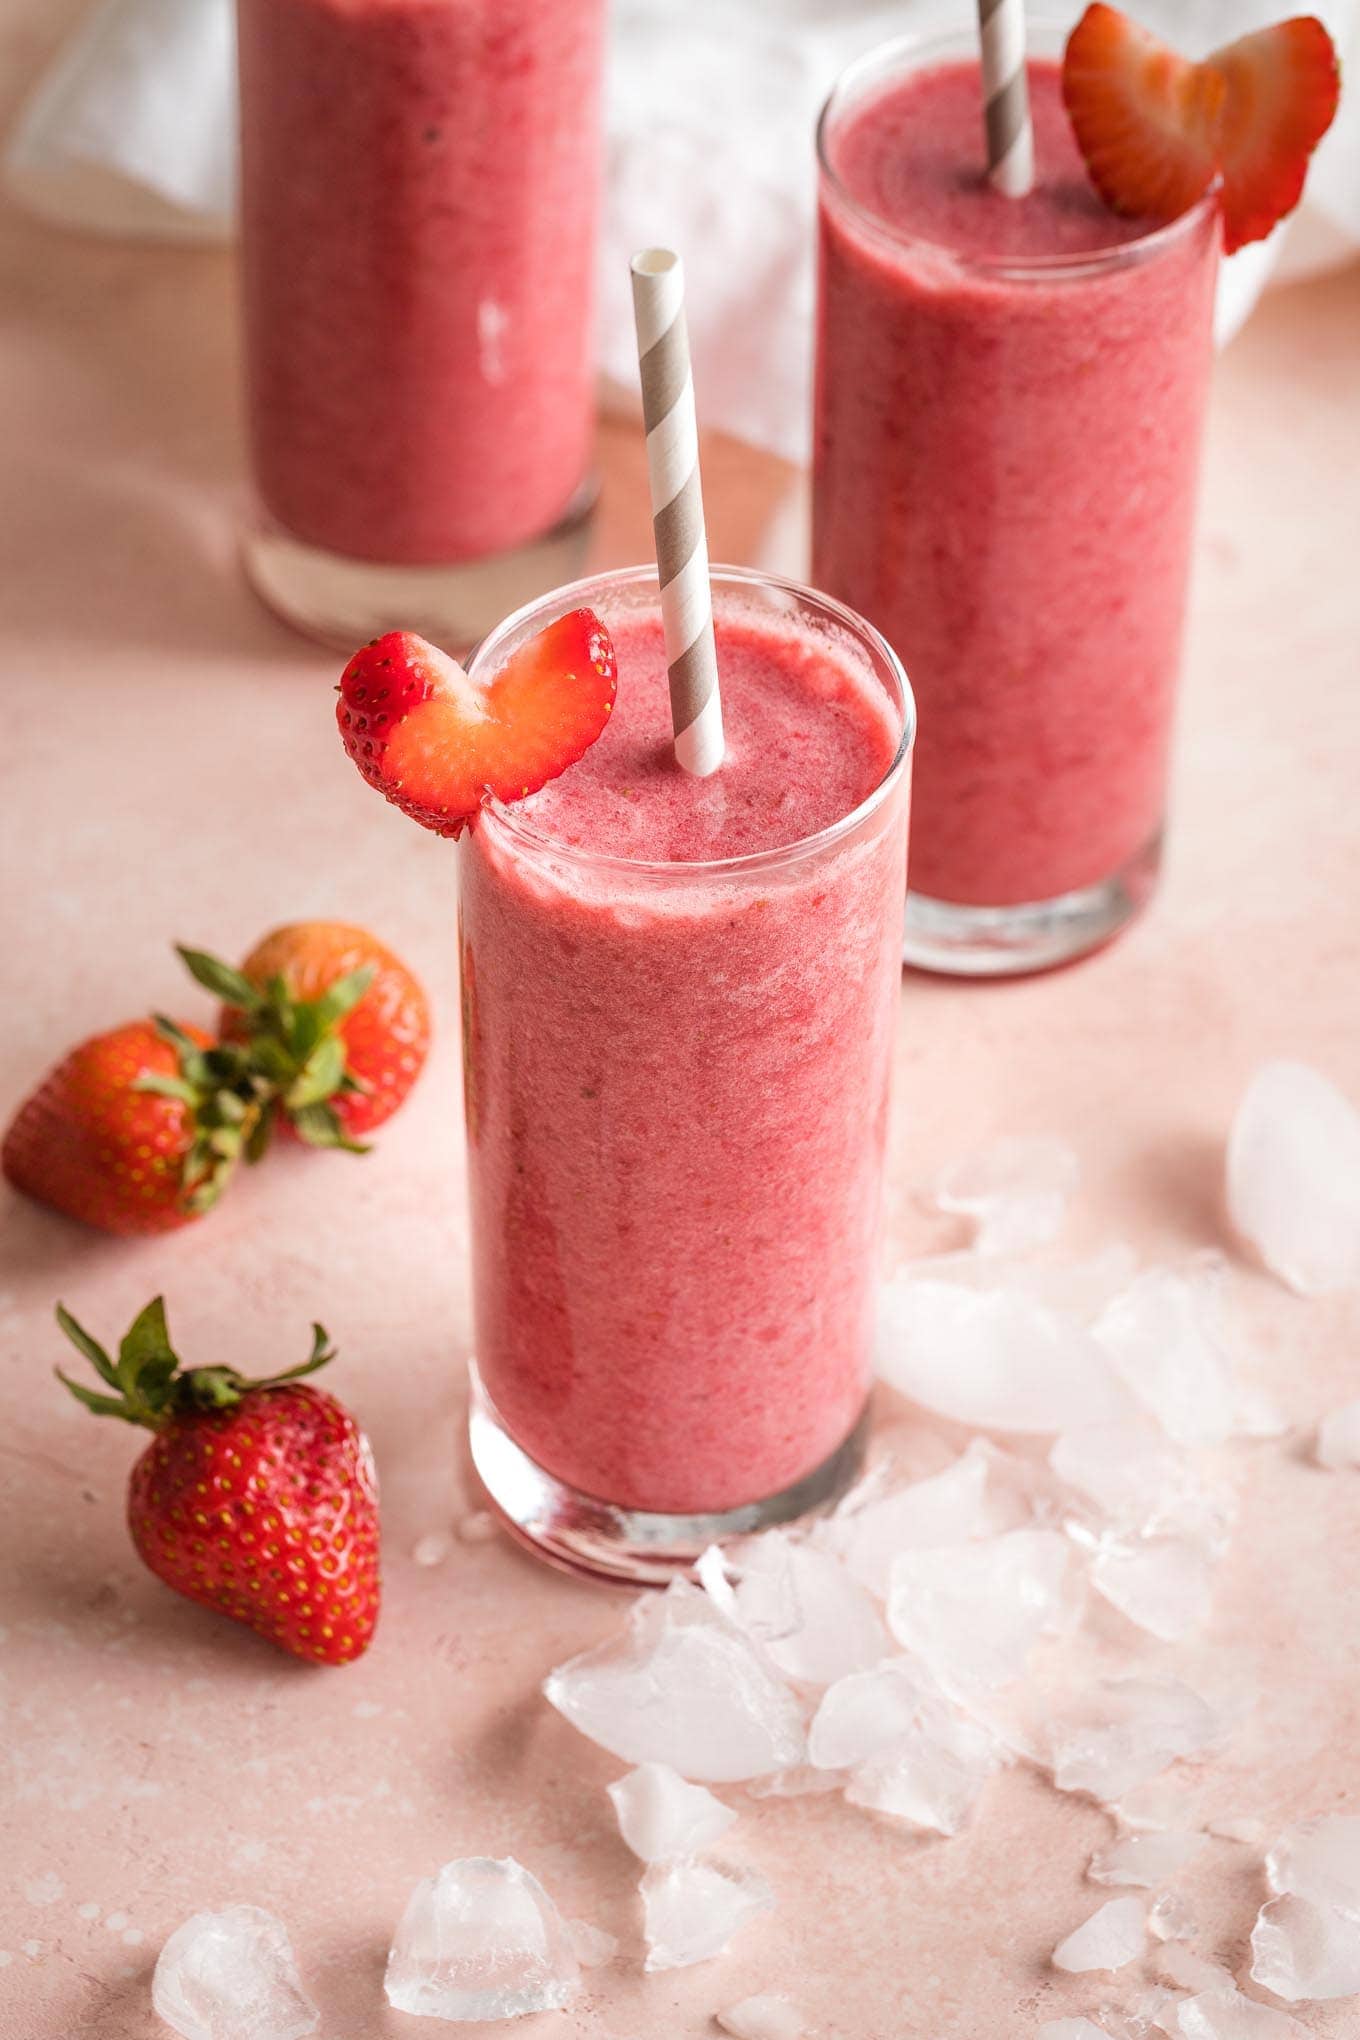 https://www.nourish-and-fete.com/wp-content/uploads/2020/05/strawberry-pomegranate-smoothie-2.jpg